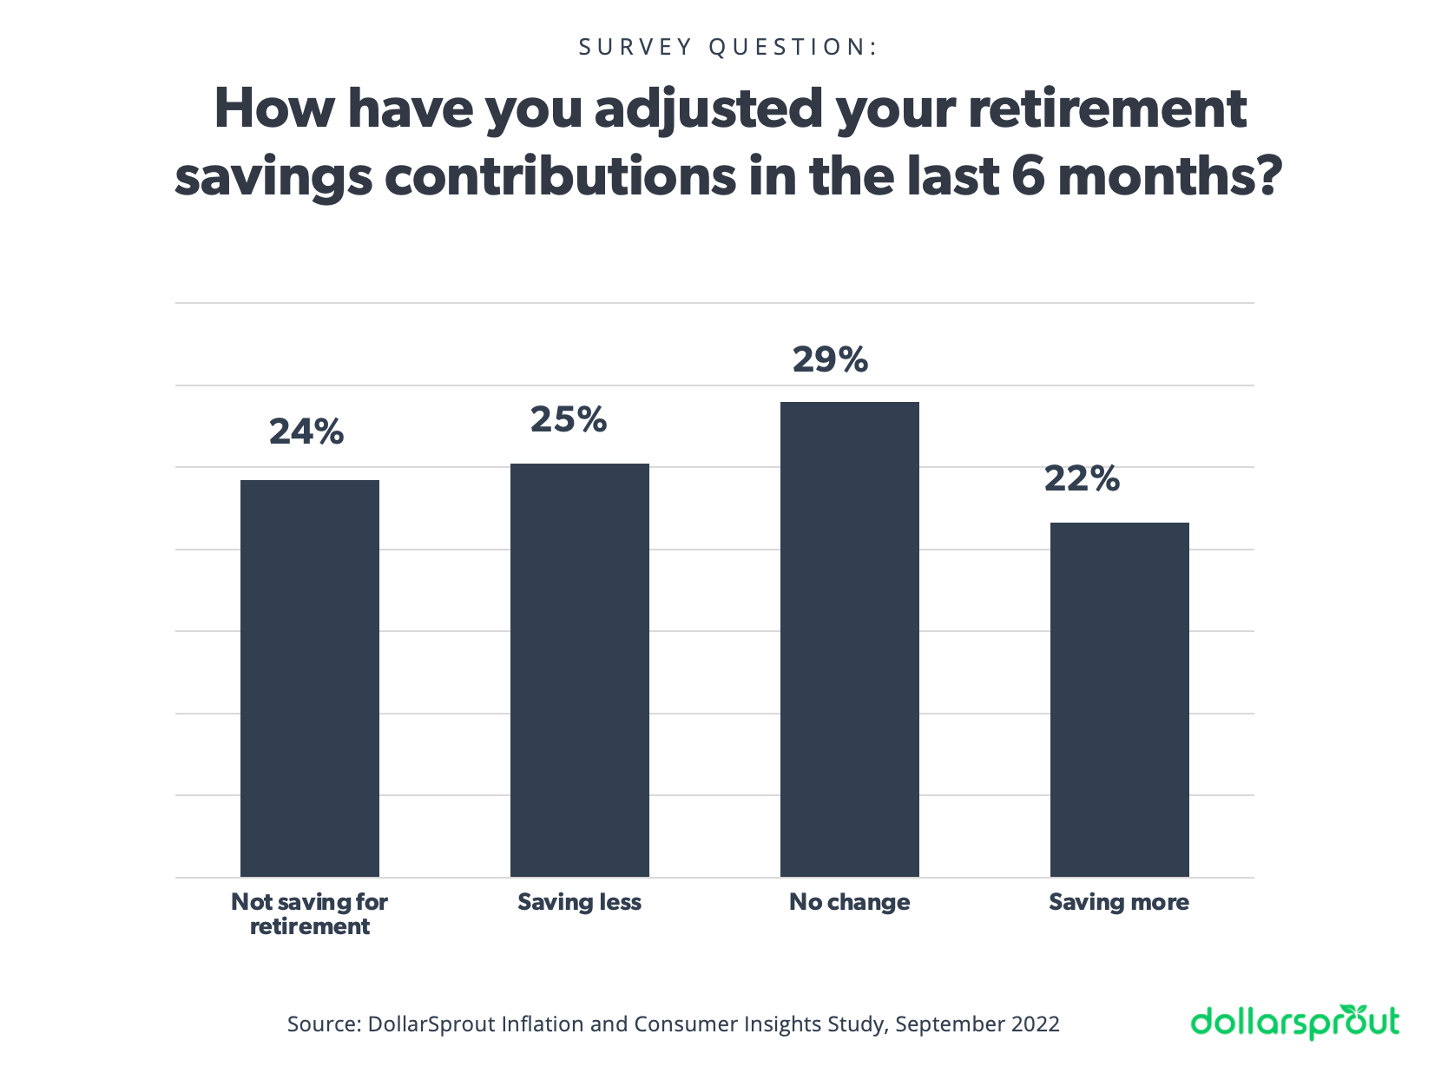 How have you adjusted your retirement savings contributions in the last 6 months?  Only 22% save more, the rest save the same, less or not at all.